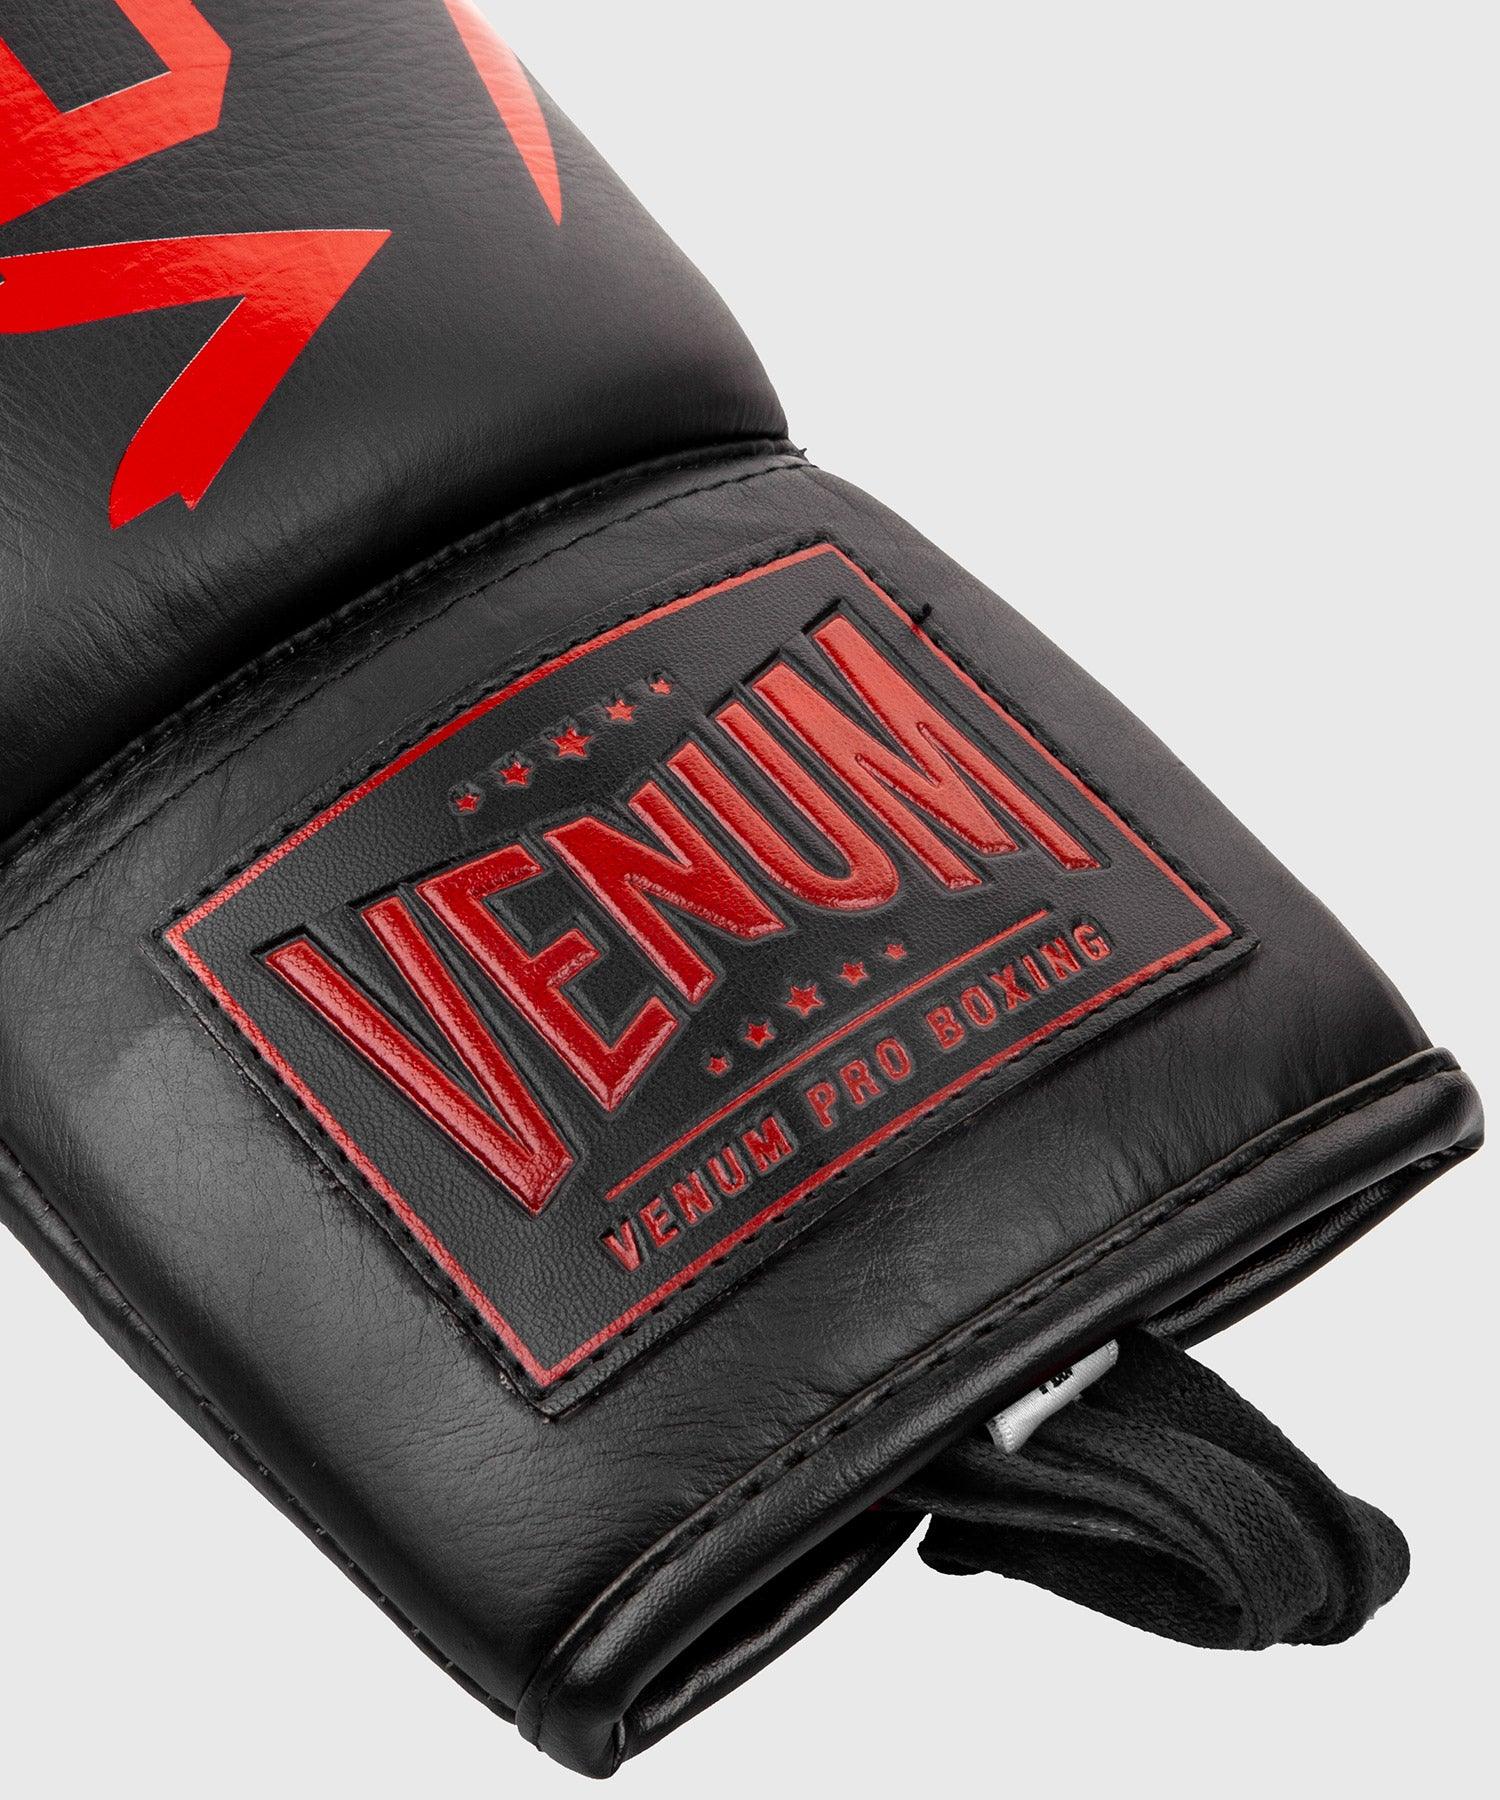 Venum Hammer Pro Boxing Gloves - With Laces - Black/Red Picture 7